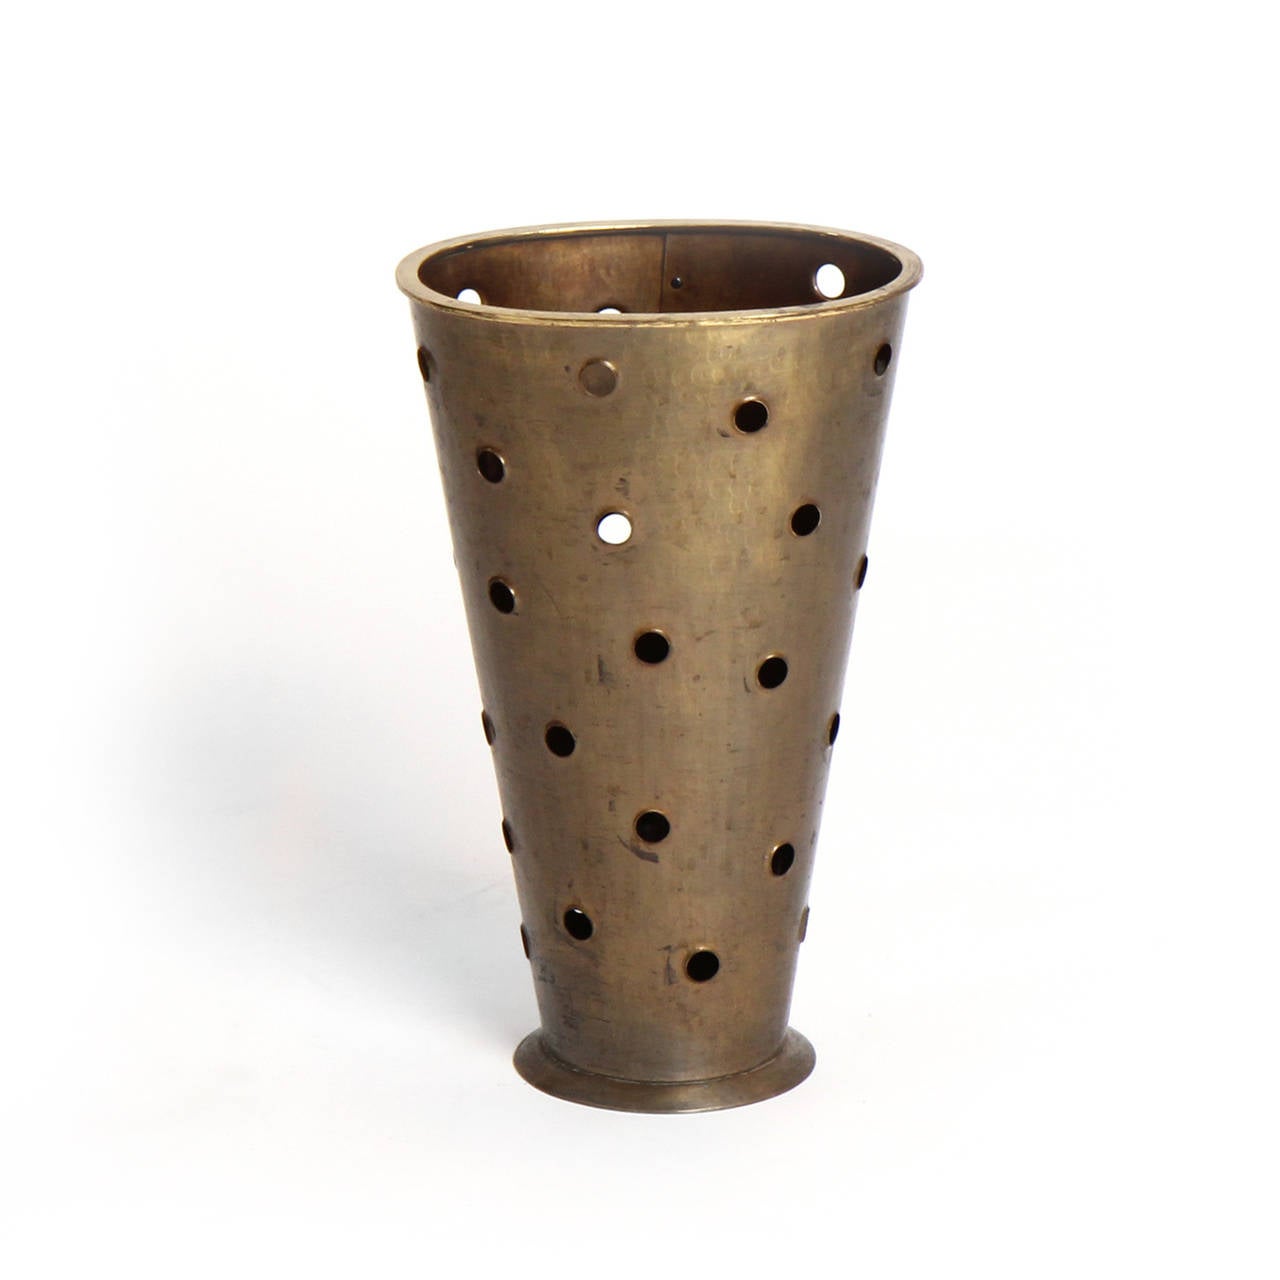 A superbly handcrafted footed cane / umbrella stand of oval form, fashioned from a single hammered and riveted sheet of patinated bronze, with perfectly executed perforations.